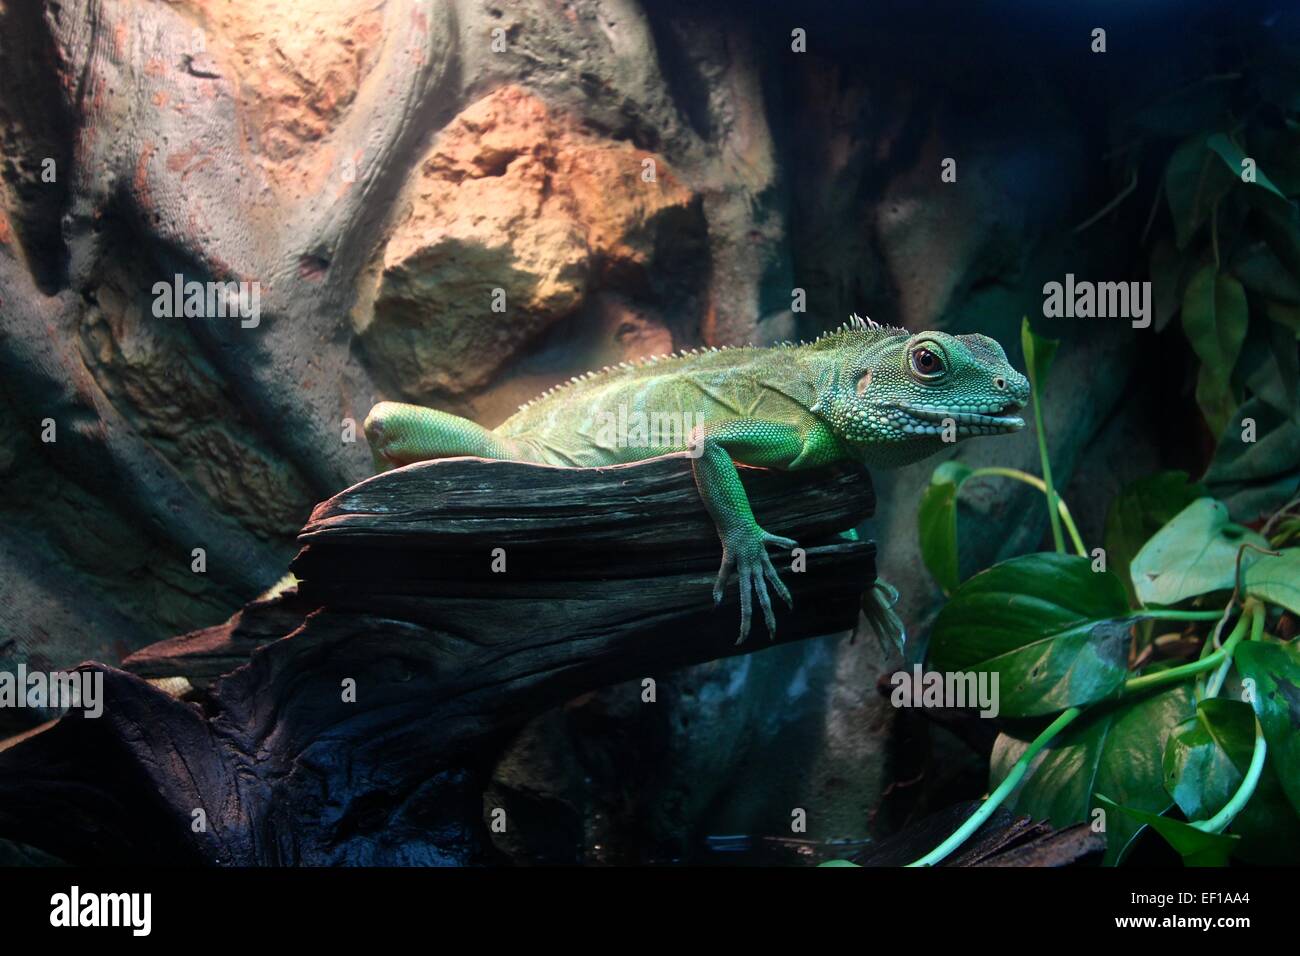 Green Lizard at Shanghai Science Technology Museum China Stock Photo